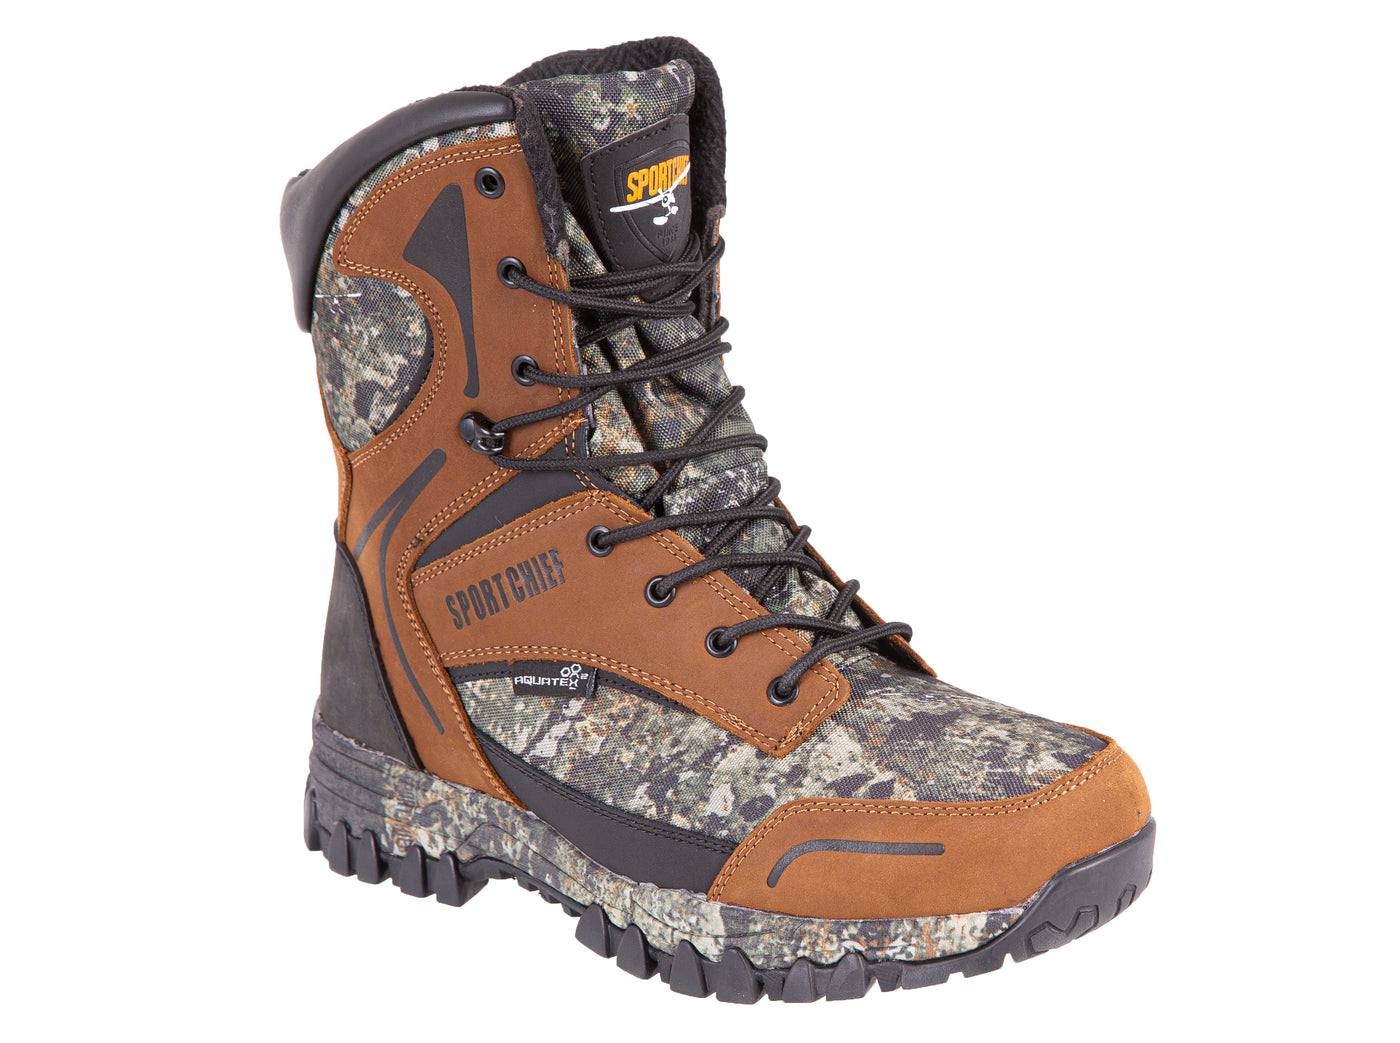 Botte de chasse homme "Panther 3.0" camo The Ripper  - Sportchief